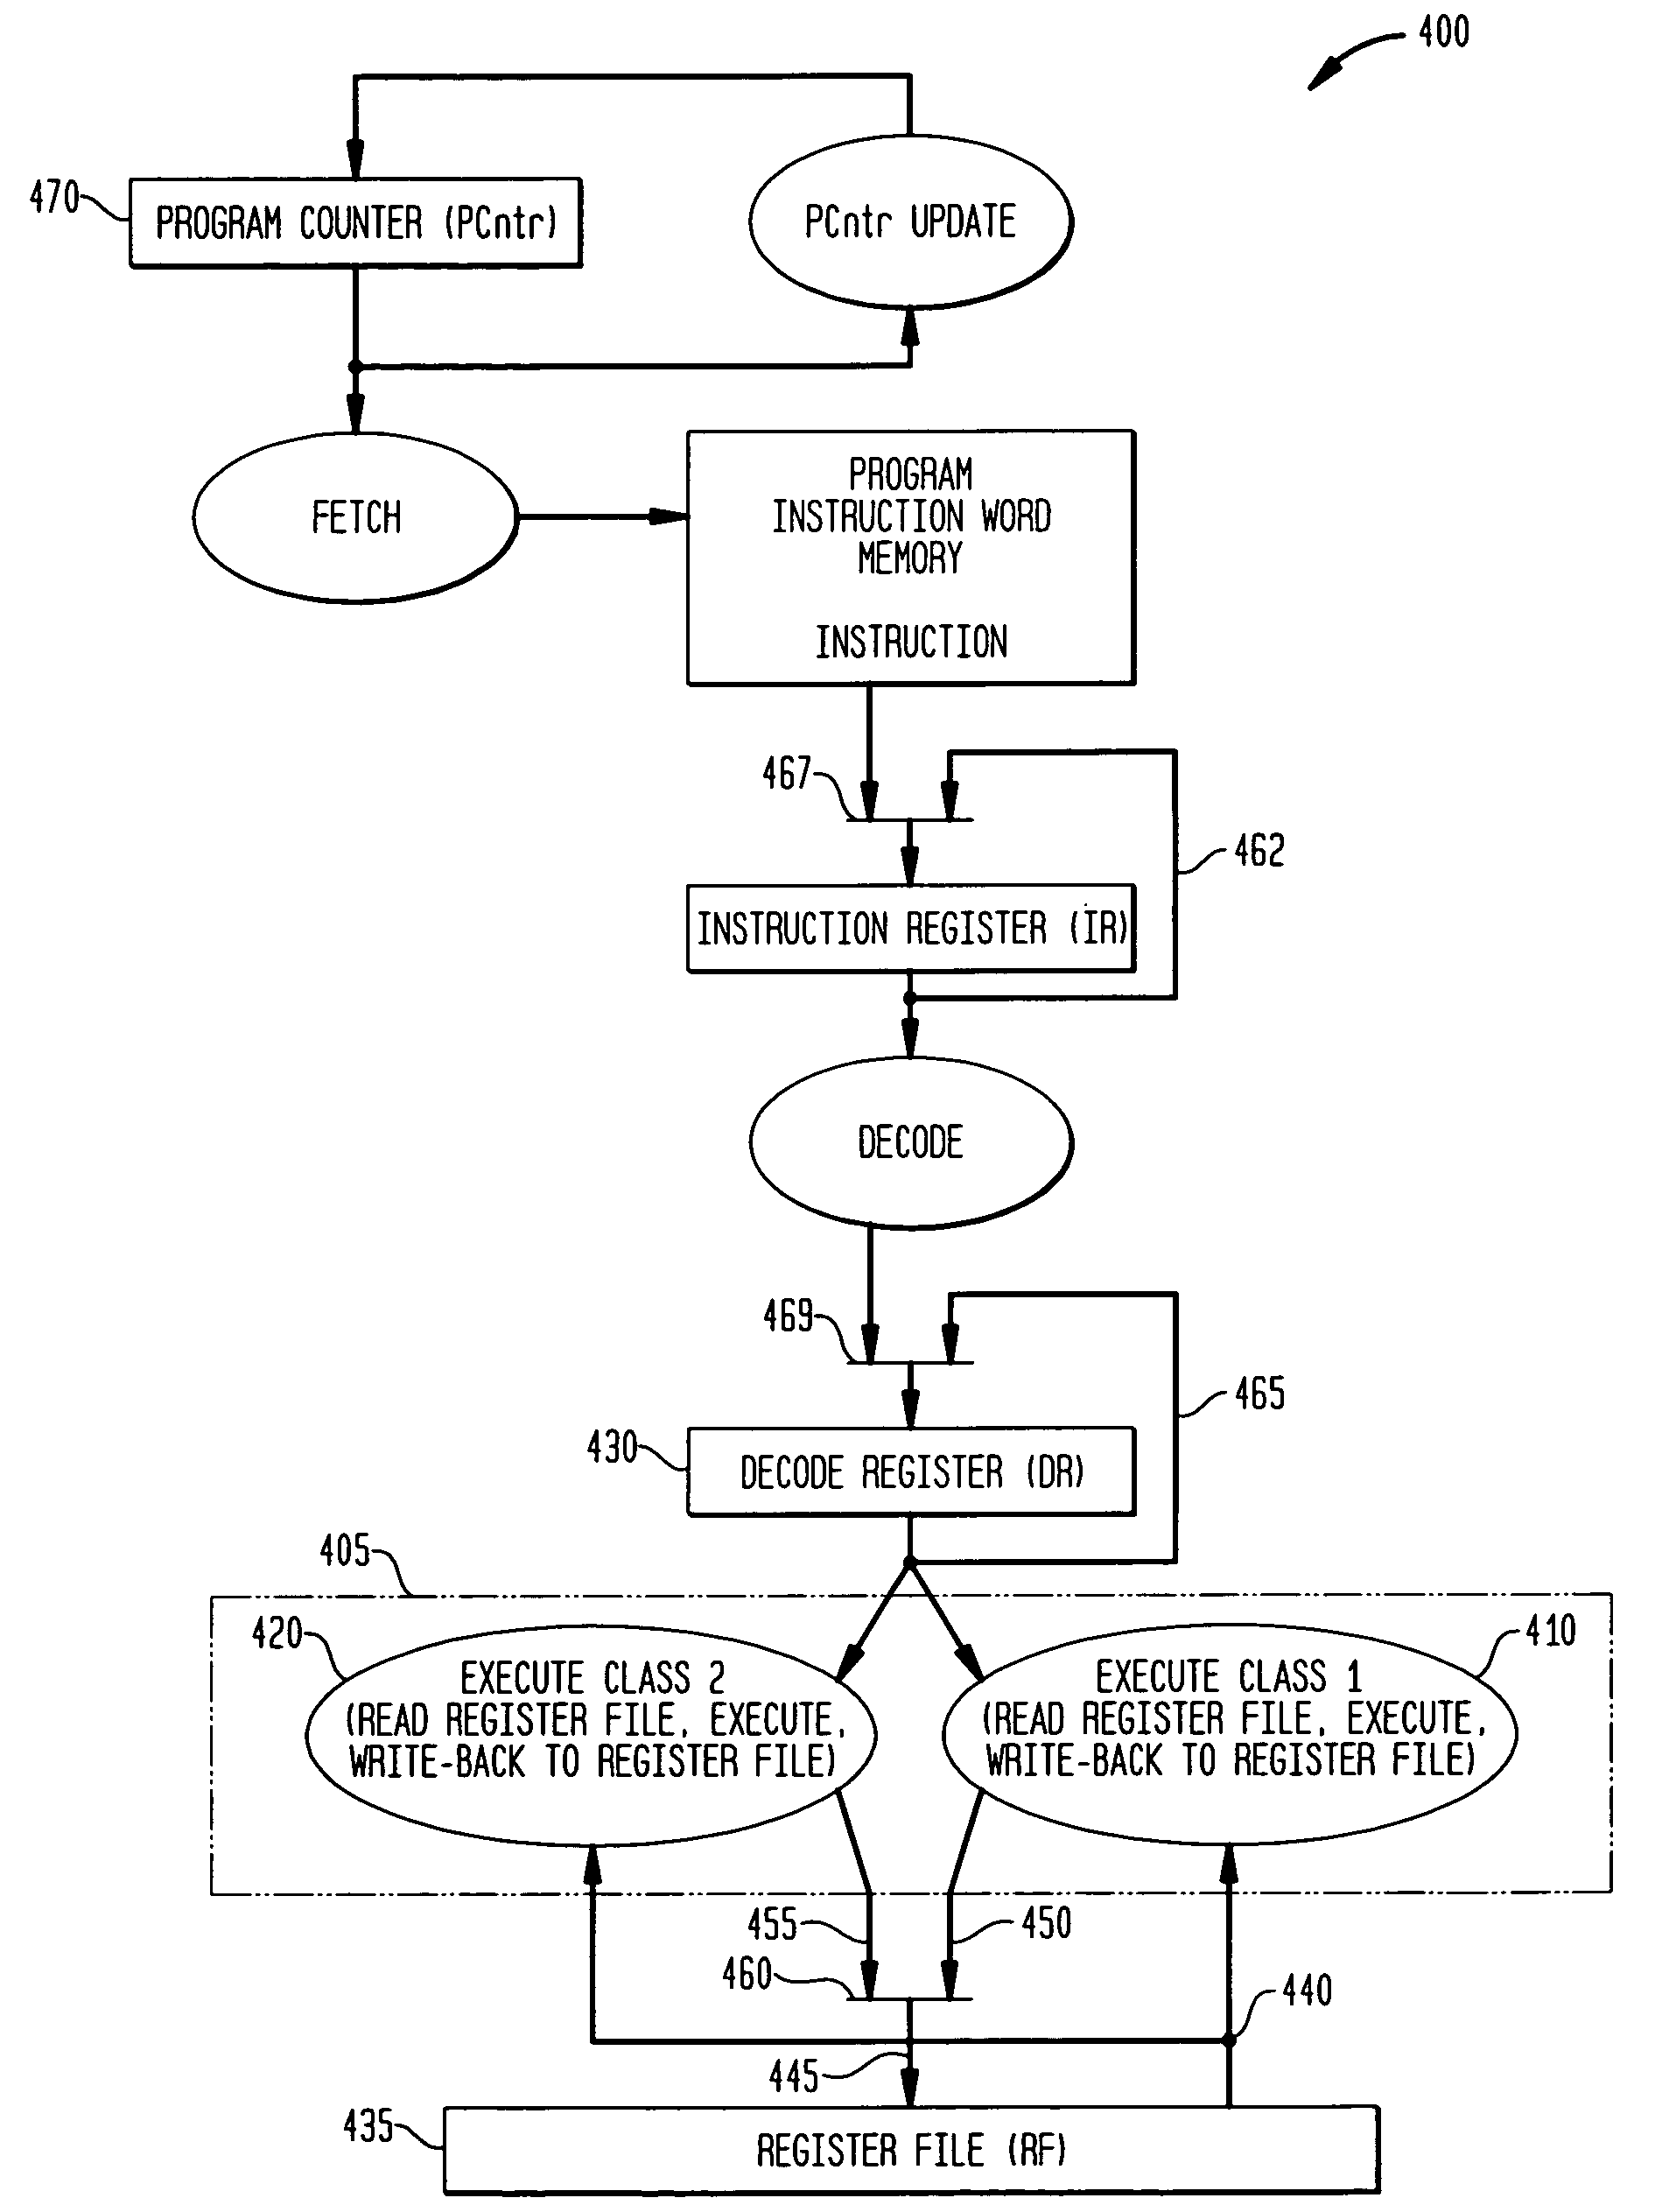 Methods and apparatus for adapting pipeline stage latency based on instruction type